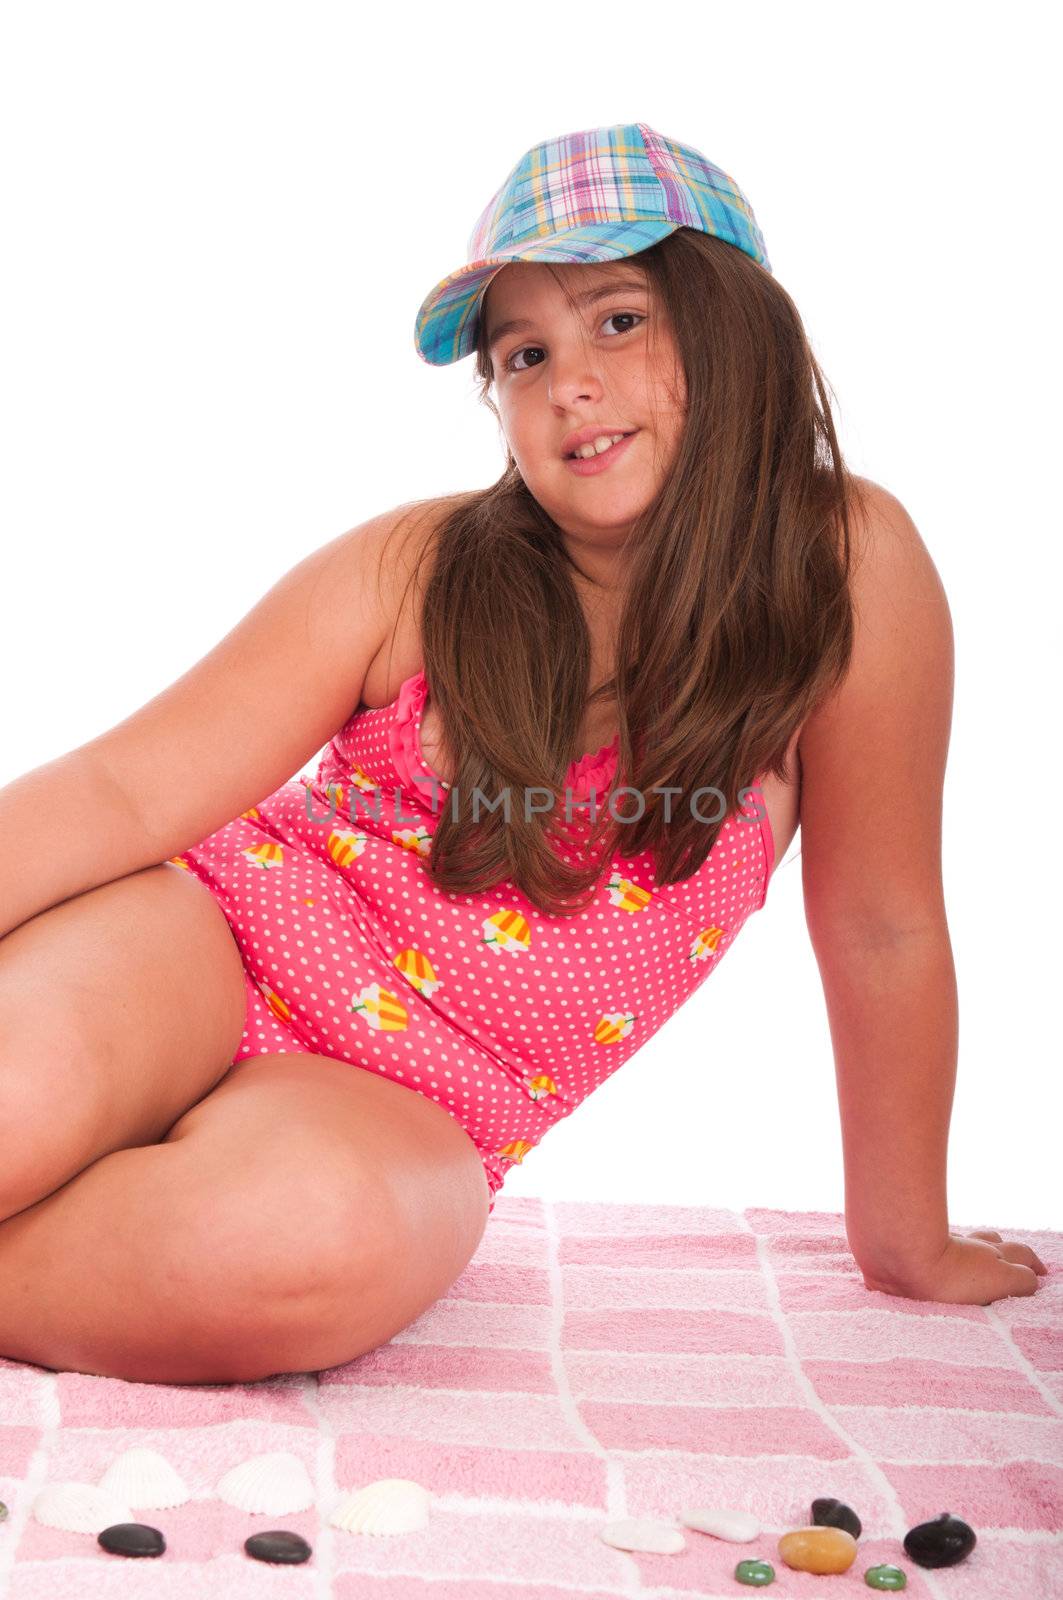 beautiful brunette teenage girl in swimsuit at the beach (studio setting with towel and pebbles, isolated on white background)